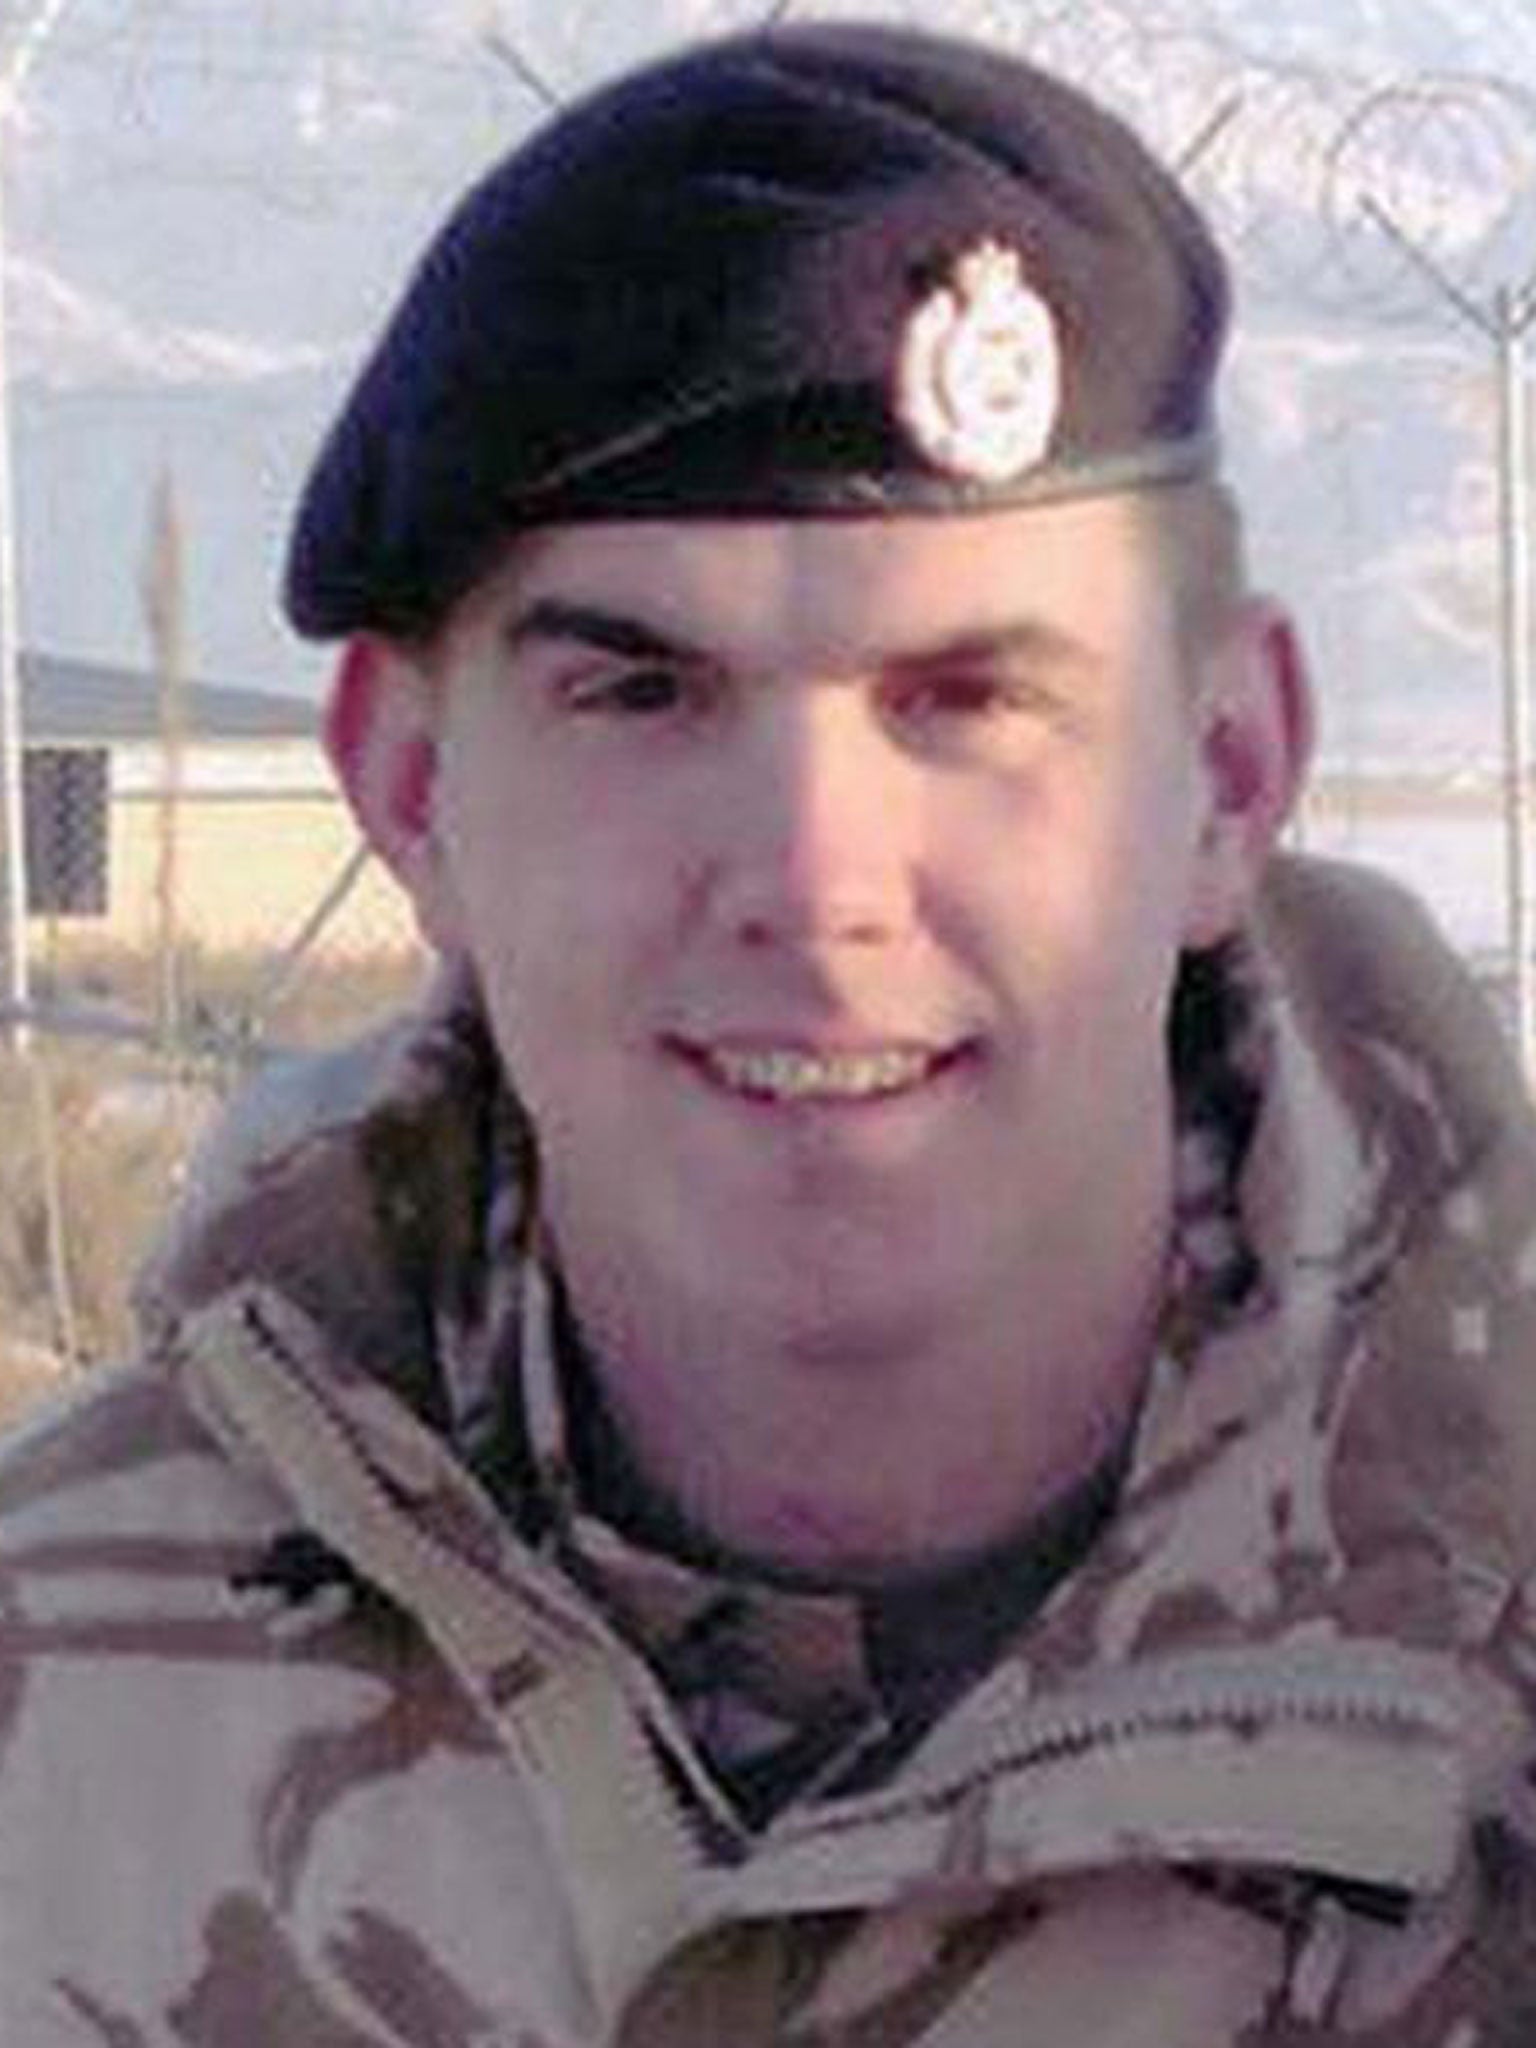 Sapper Mark Smith was killed while working in a bomb disposal team in Afghanistan